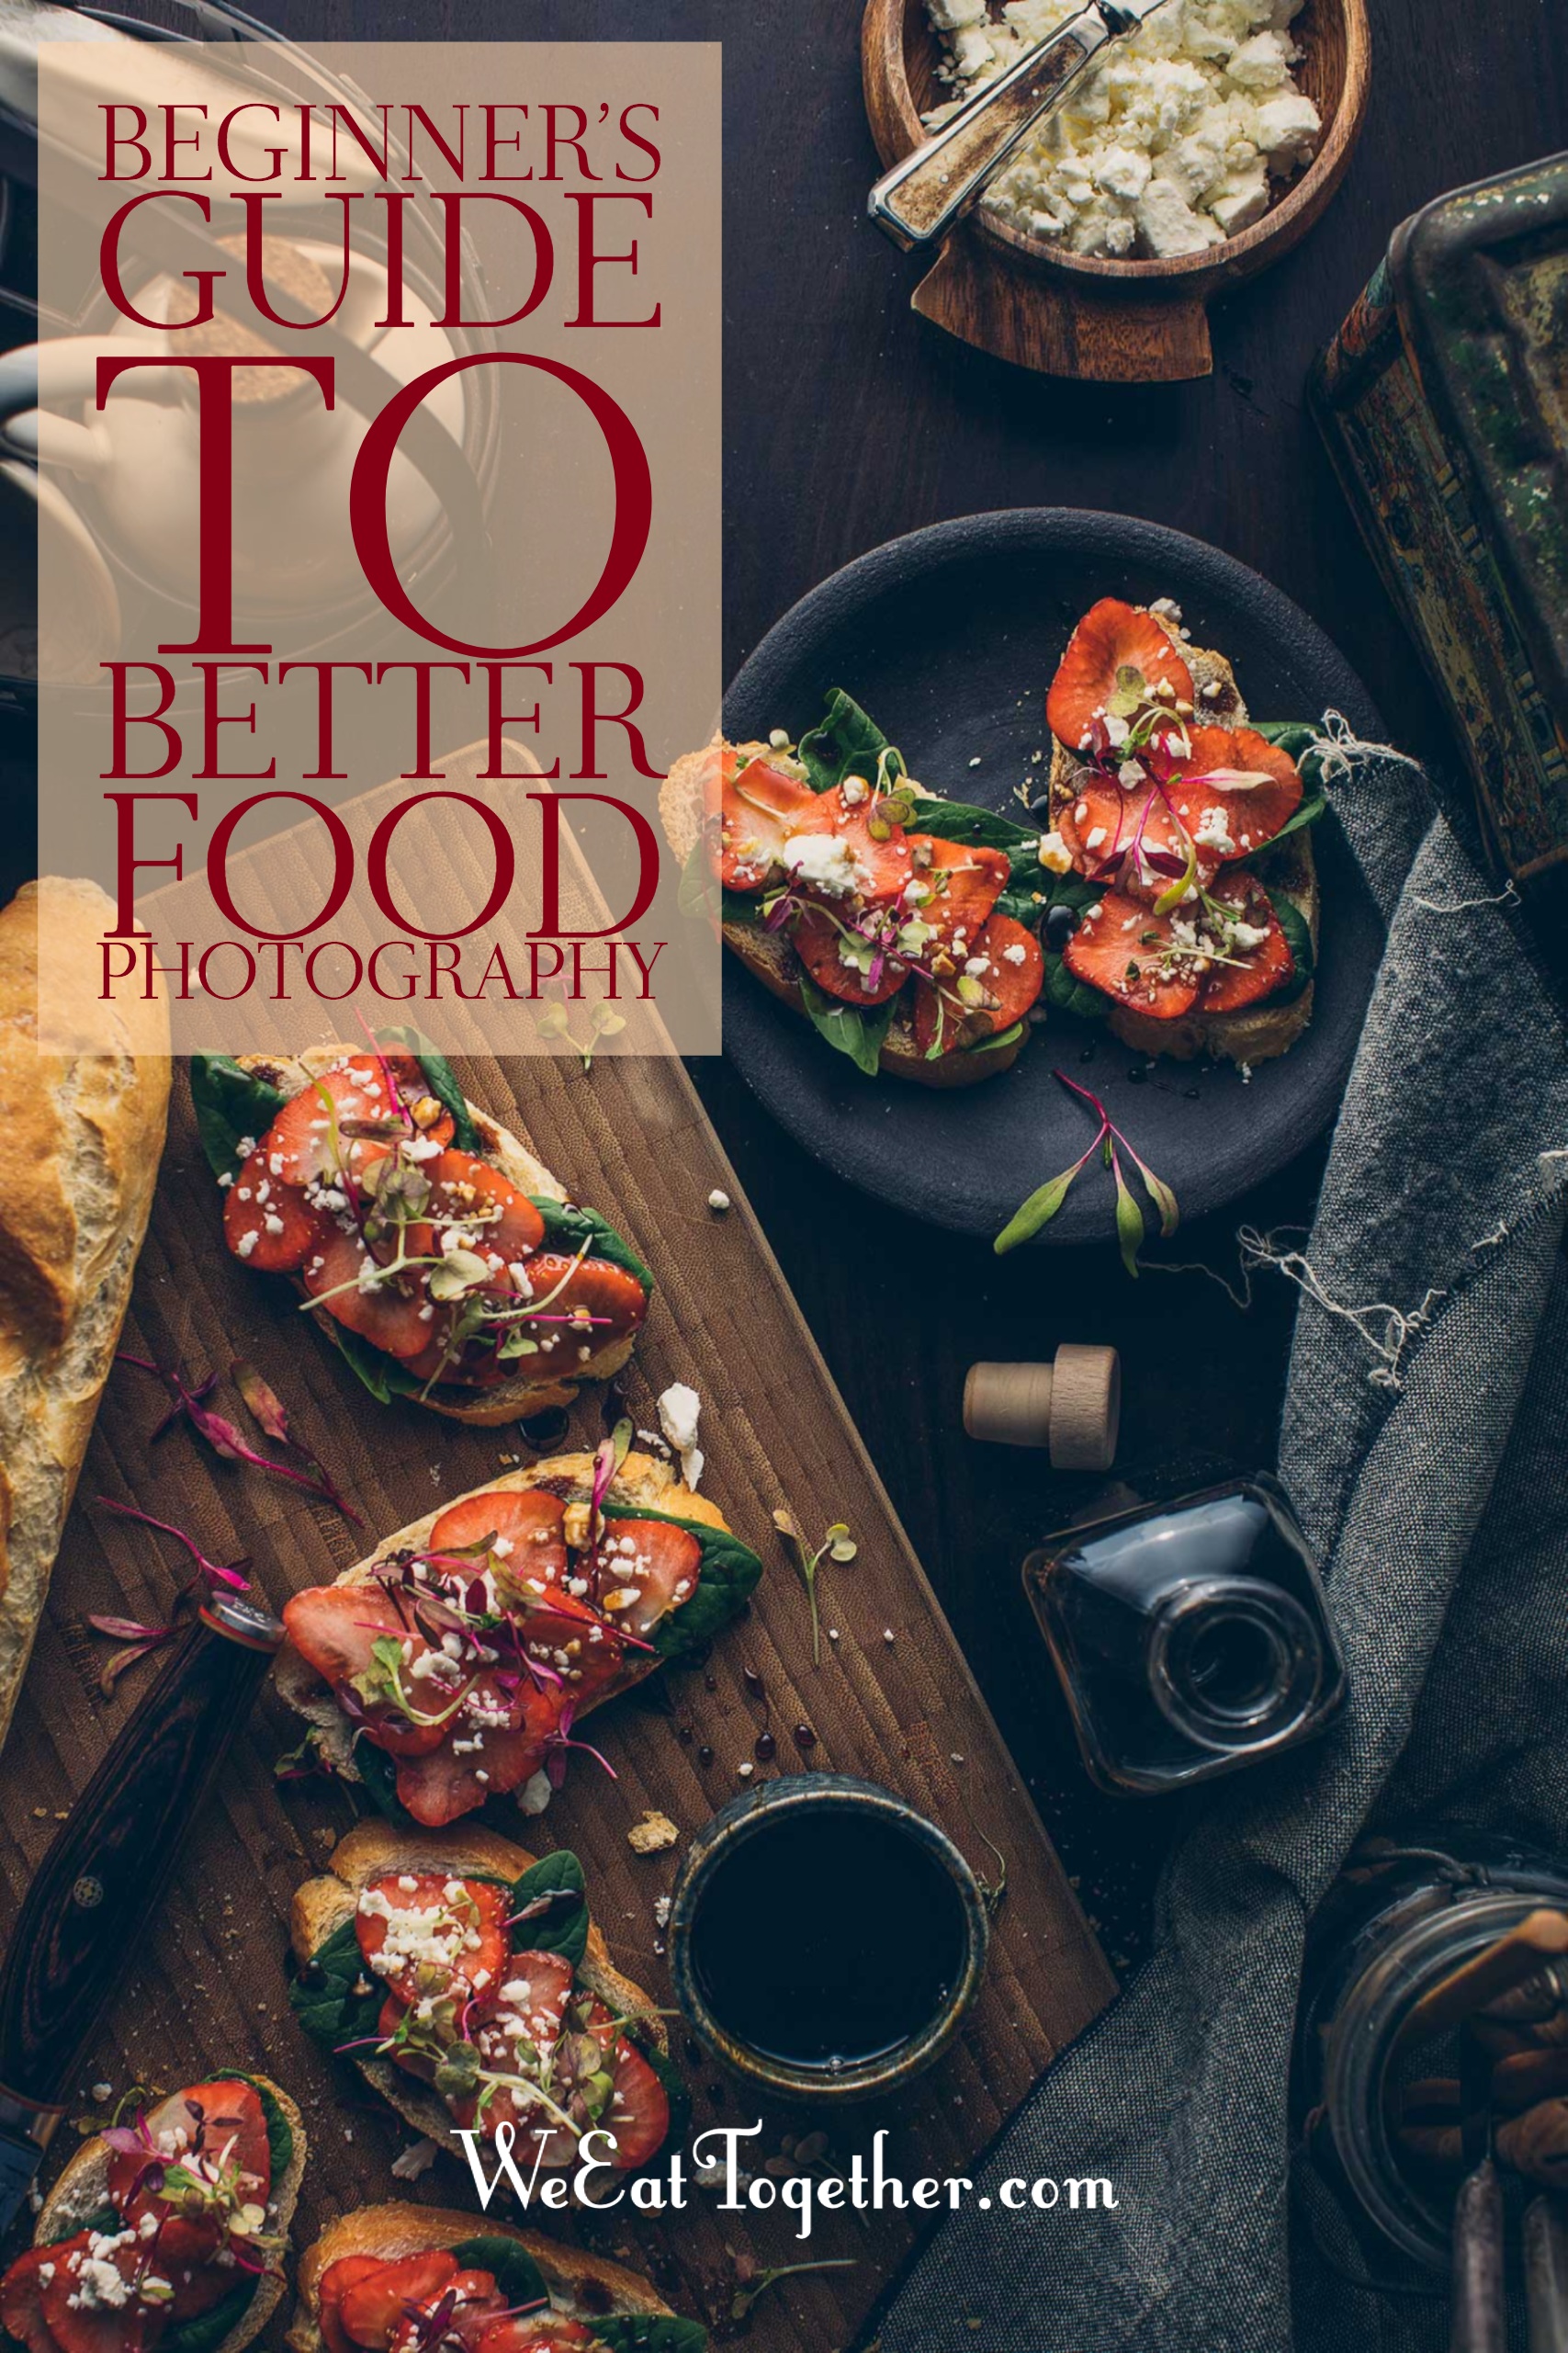 A Beginner’s Guide To Better Food Photography